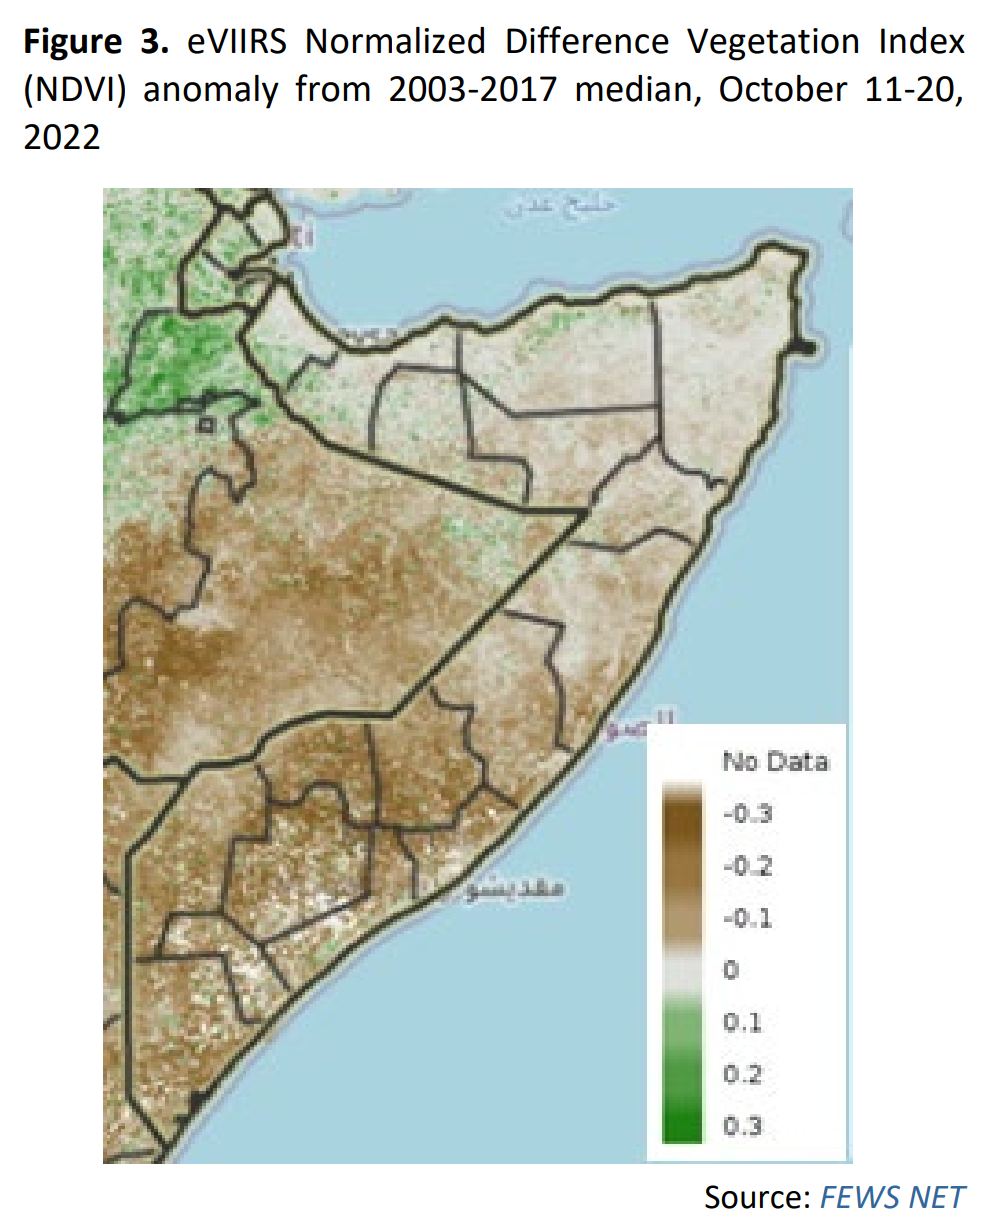 eVIIRS Normalized Difference Vegetation Index (NDVI) anomaly from 2003-2017 median for Somalia, 11-20 October 2022. Graphic: FEWS NET